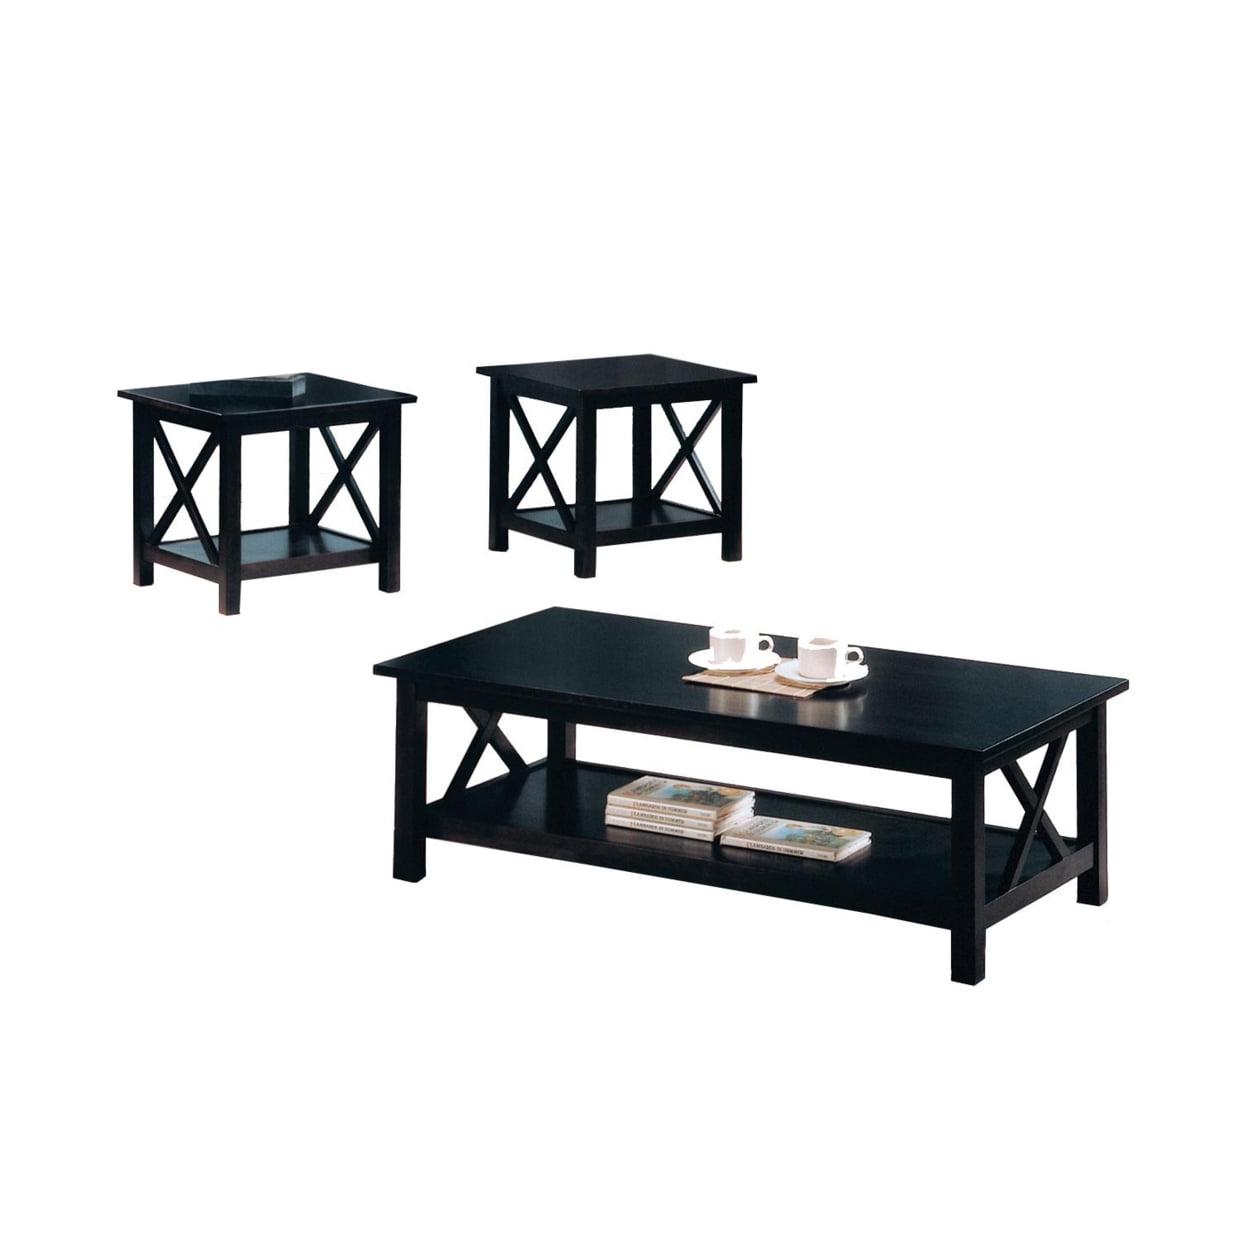 Transitional Merlot 3-Piece Coffee and End Table Set with X-Style Frame